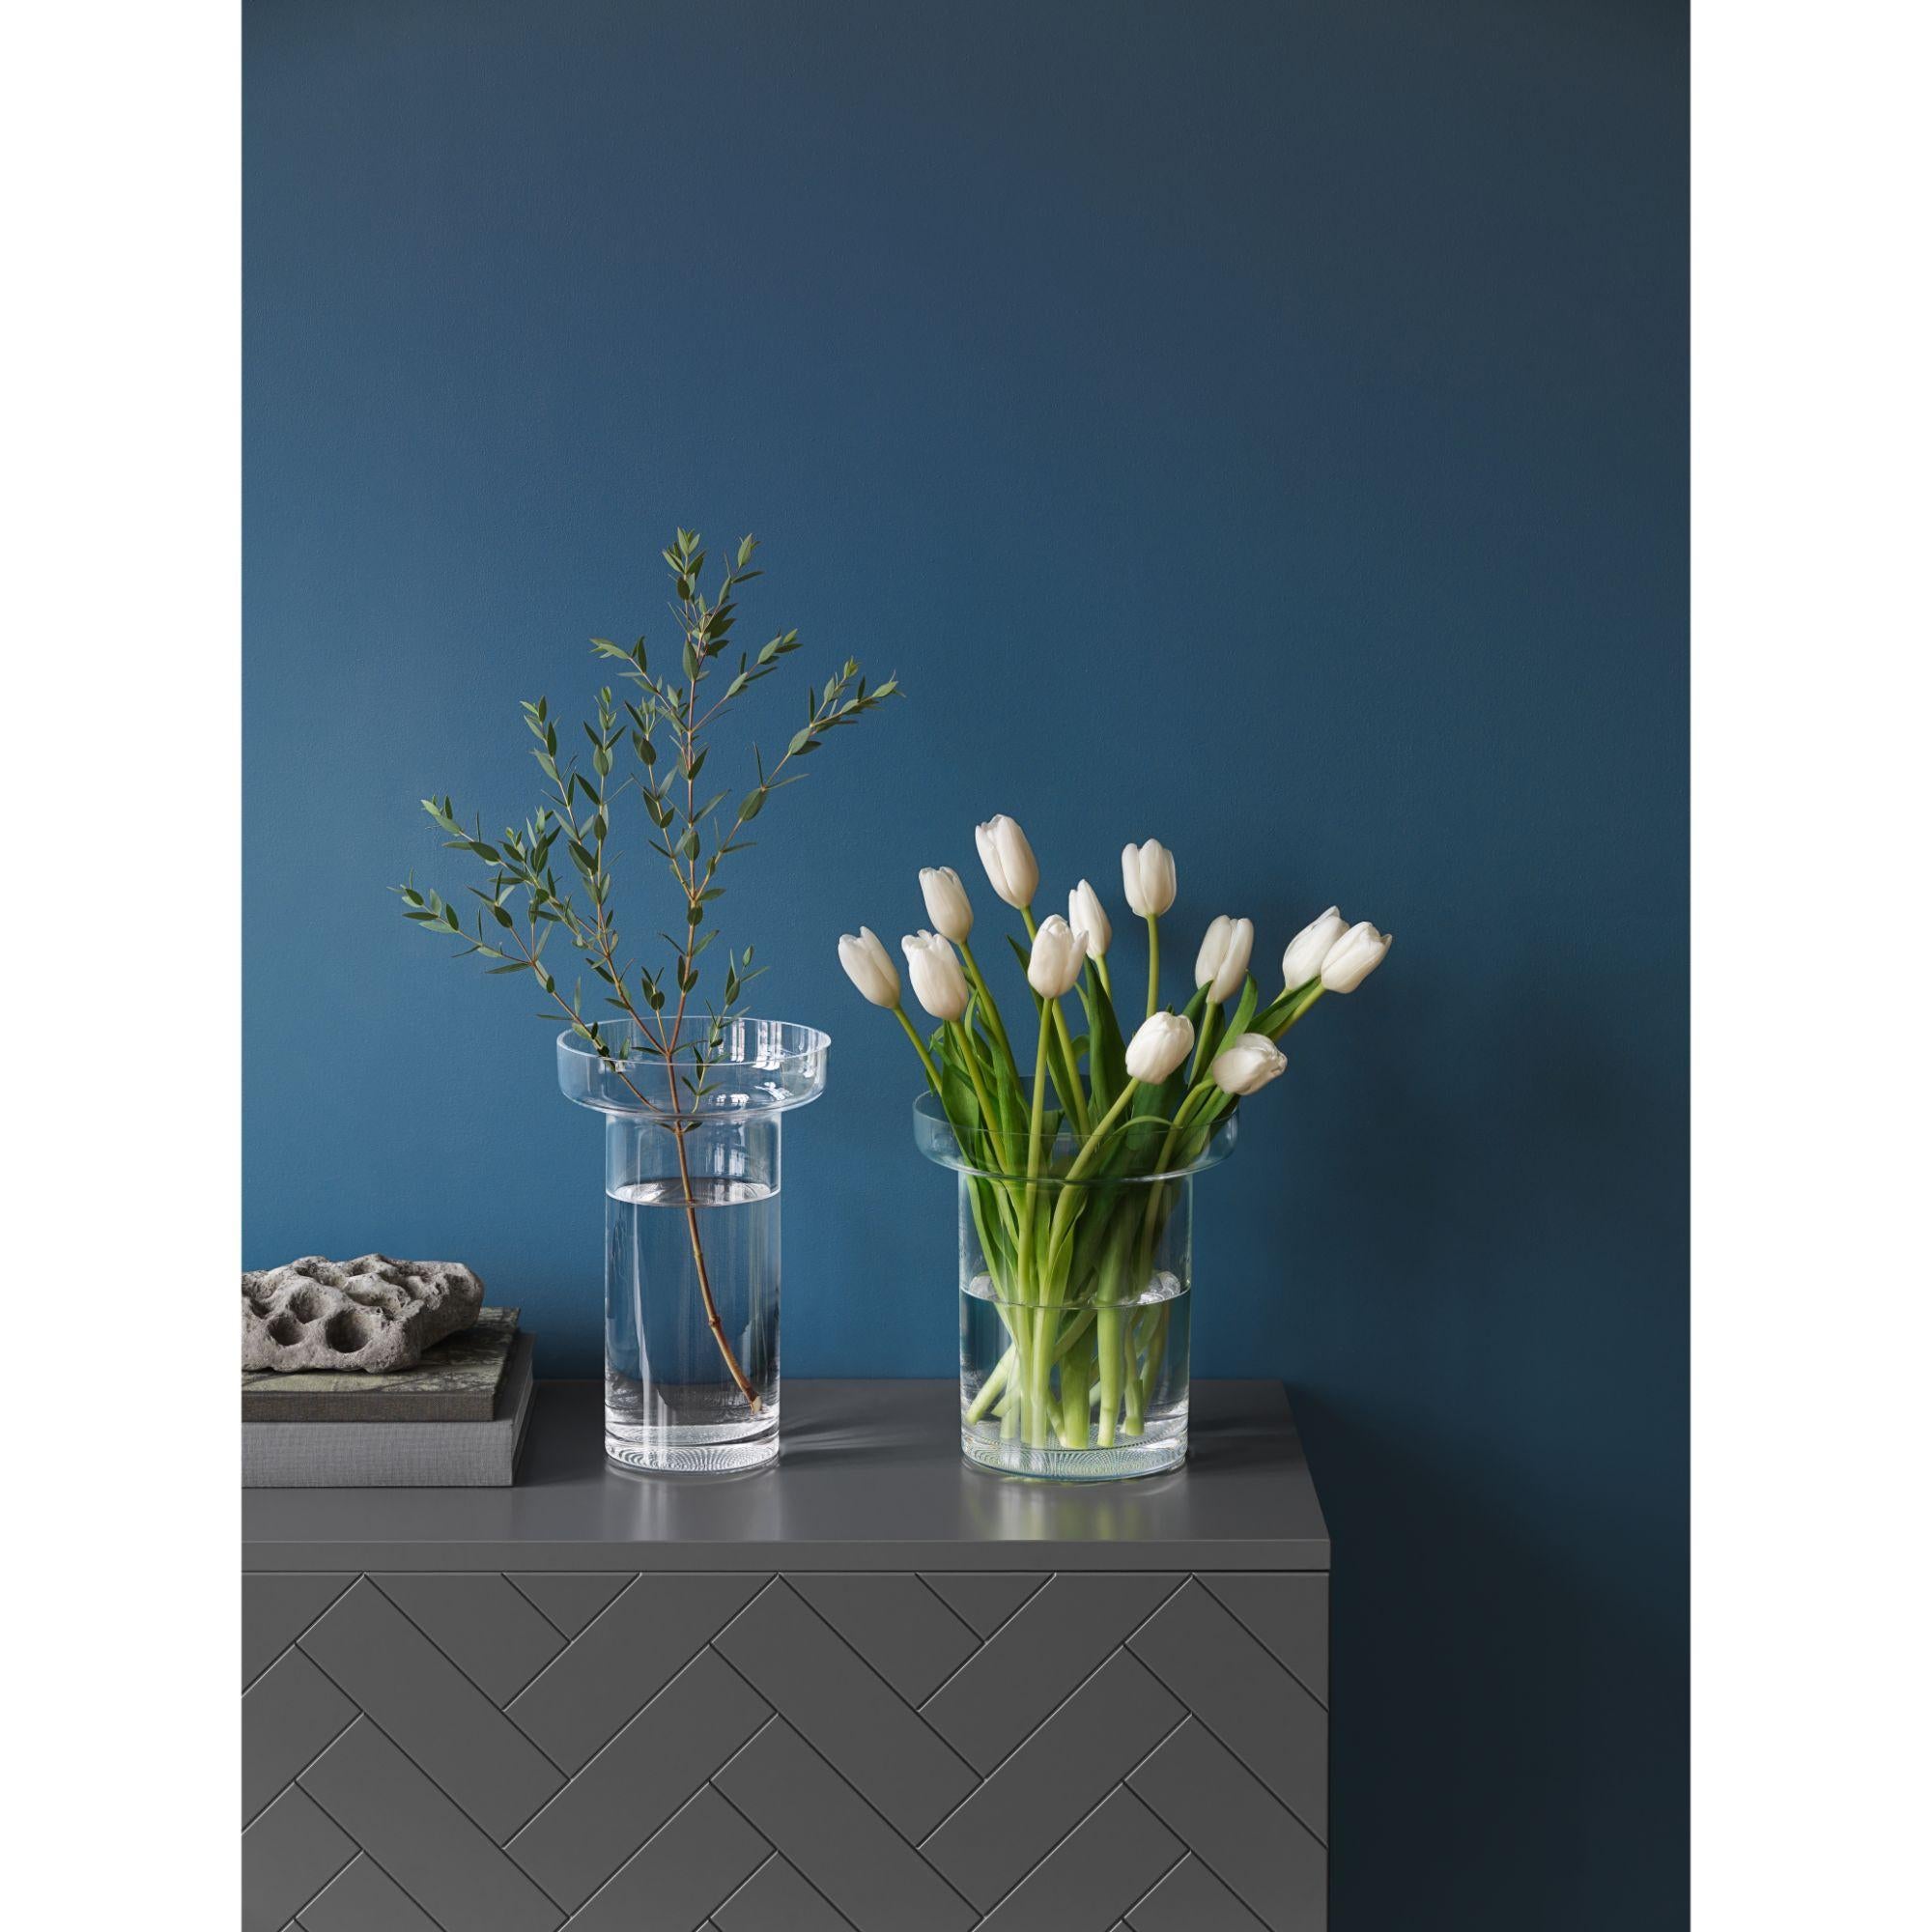 The low Limelight vase has a collar that perfectly frames and highlights any bouquet, and the shape of the vase makes it ideal for top-heavy flowers. Like all the items in the Limelight collection from Kosta Boda, this vase has the distinctive,